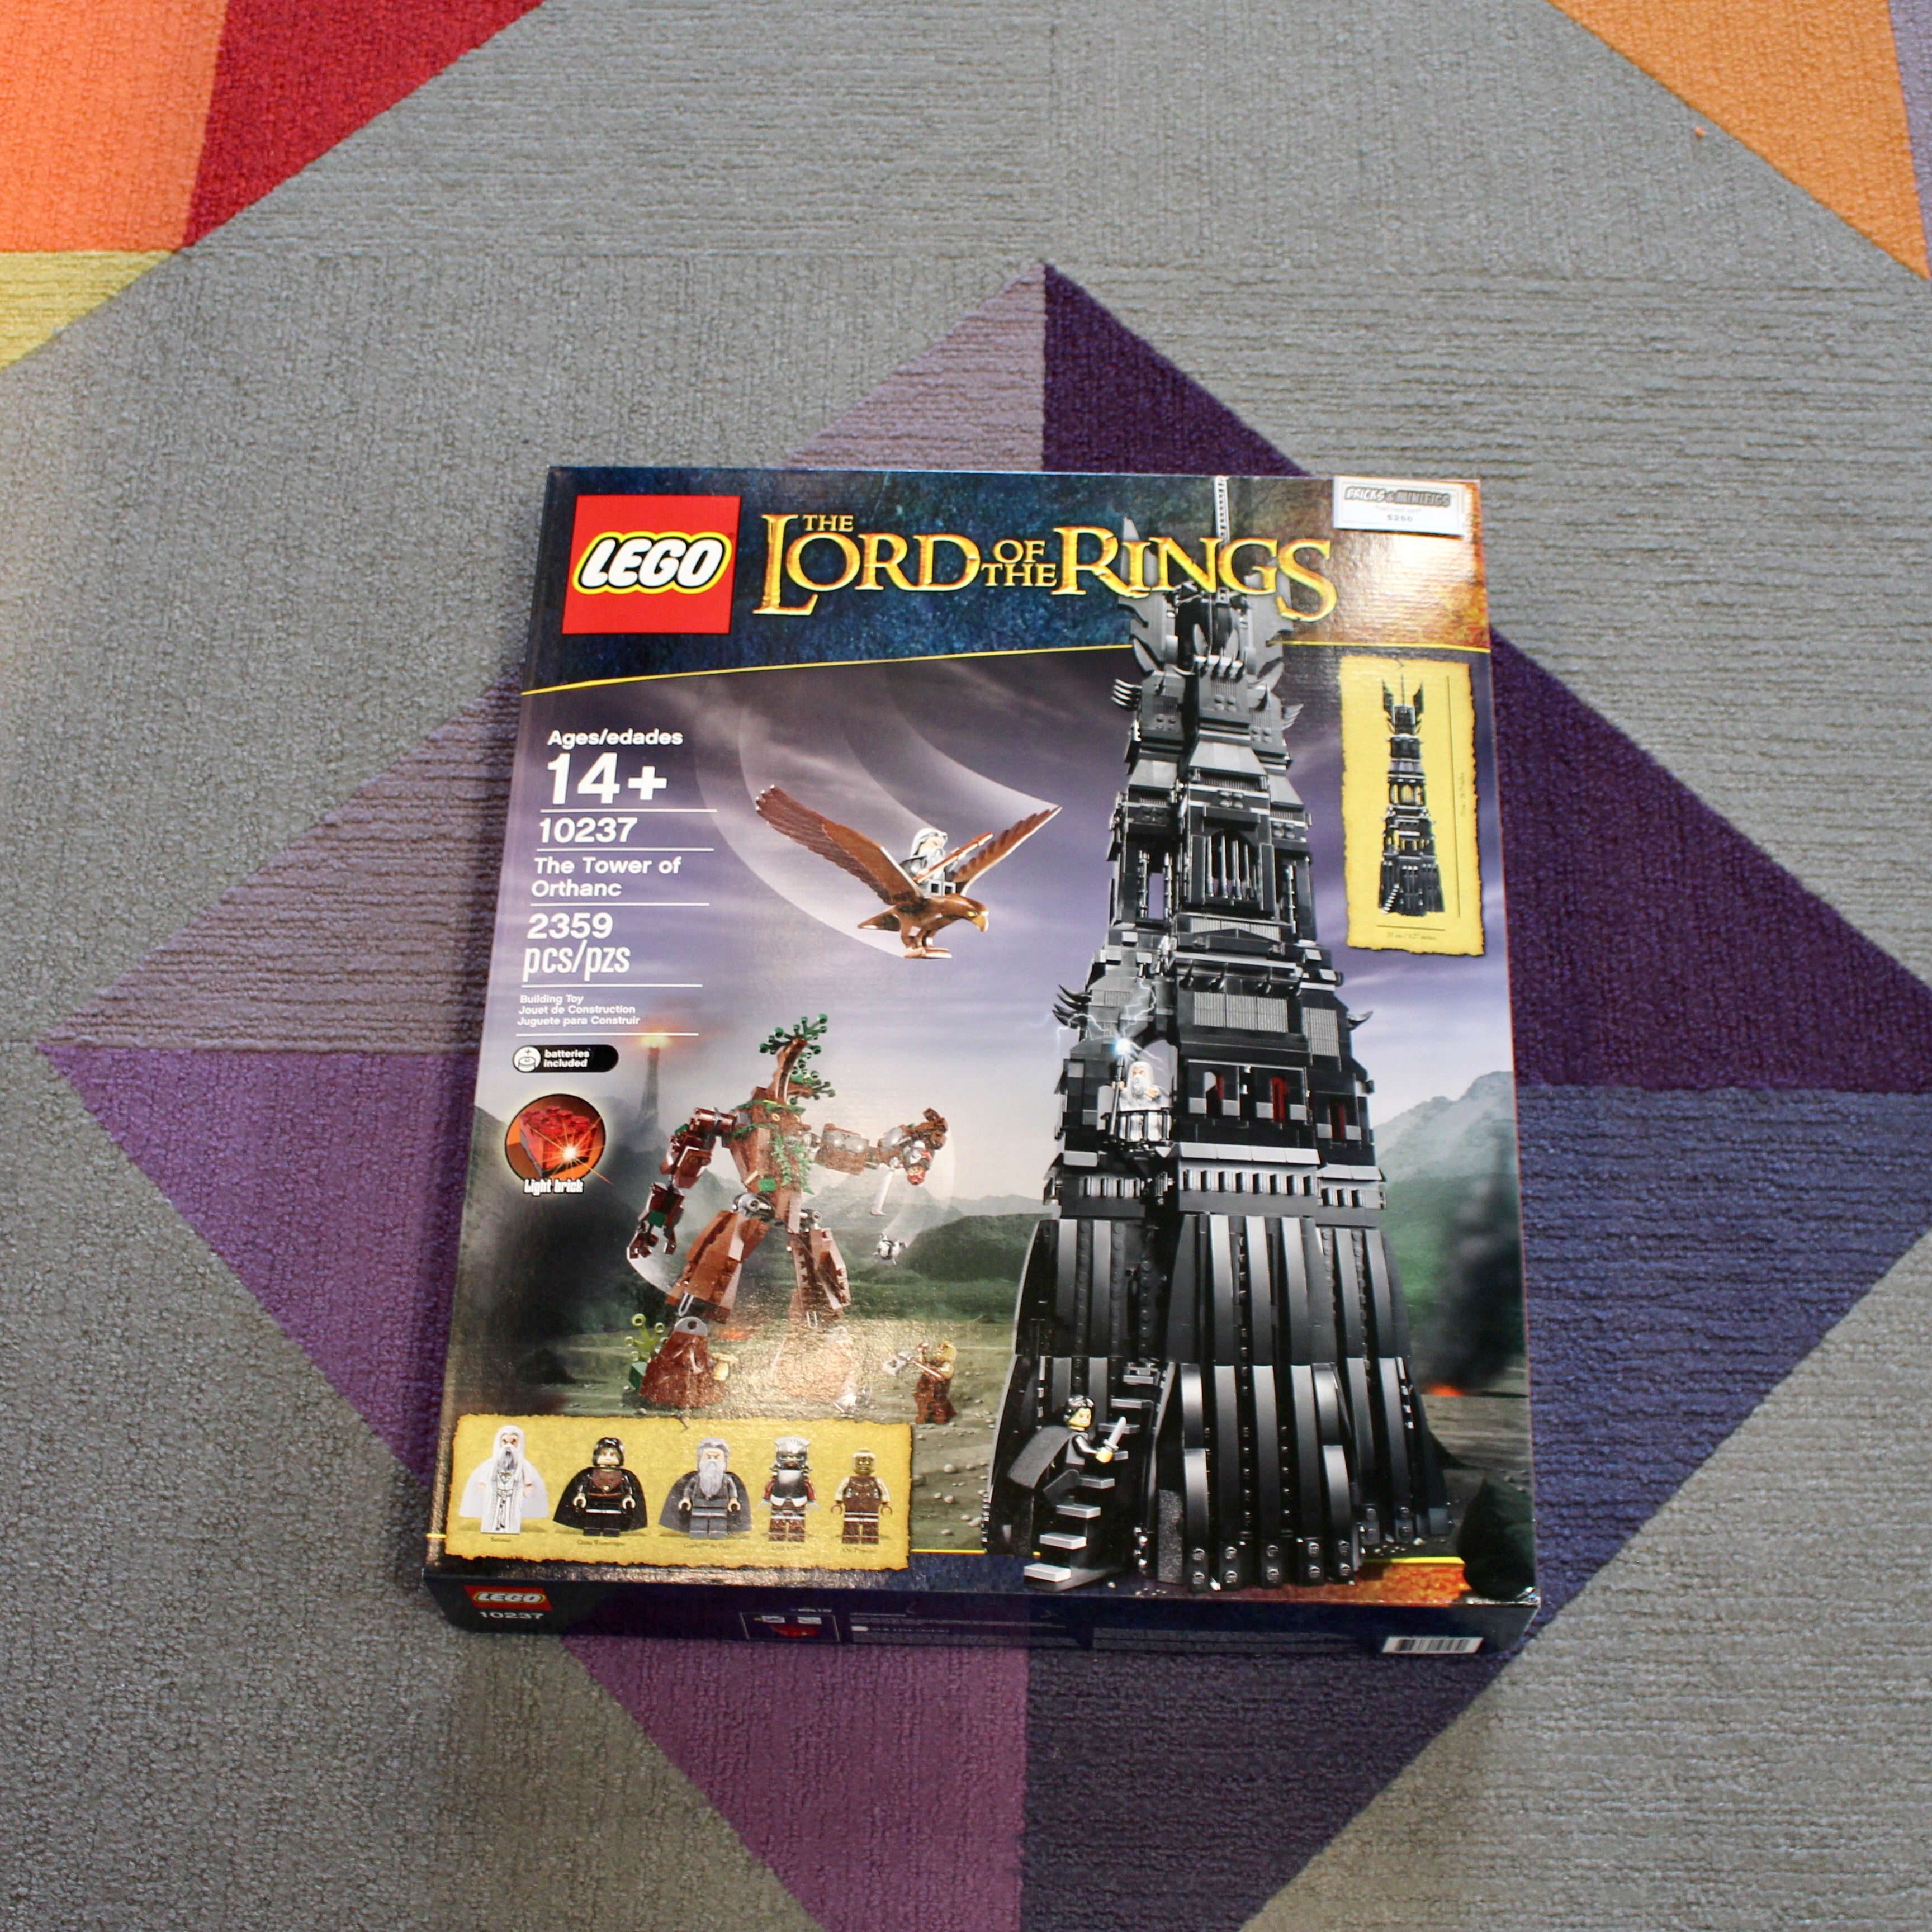 Retired Set 10237 The Lord of the Rings The Tower of Orthanc